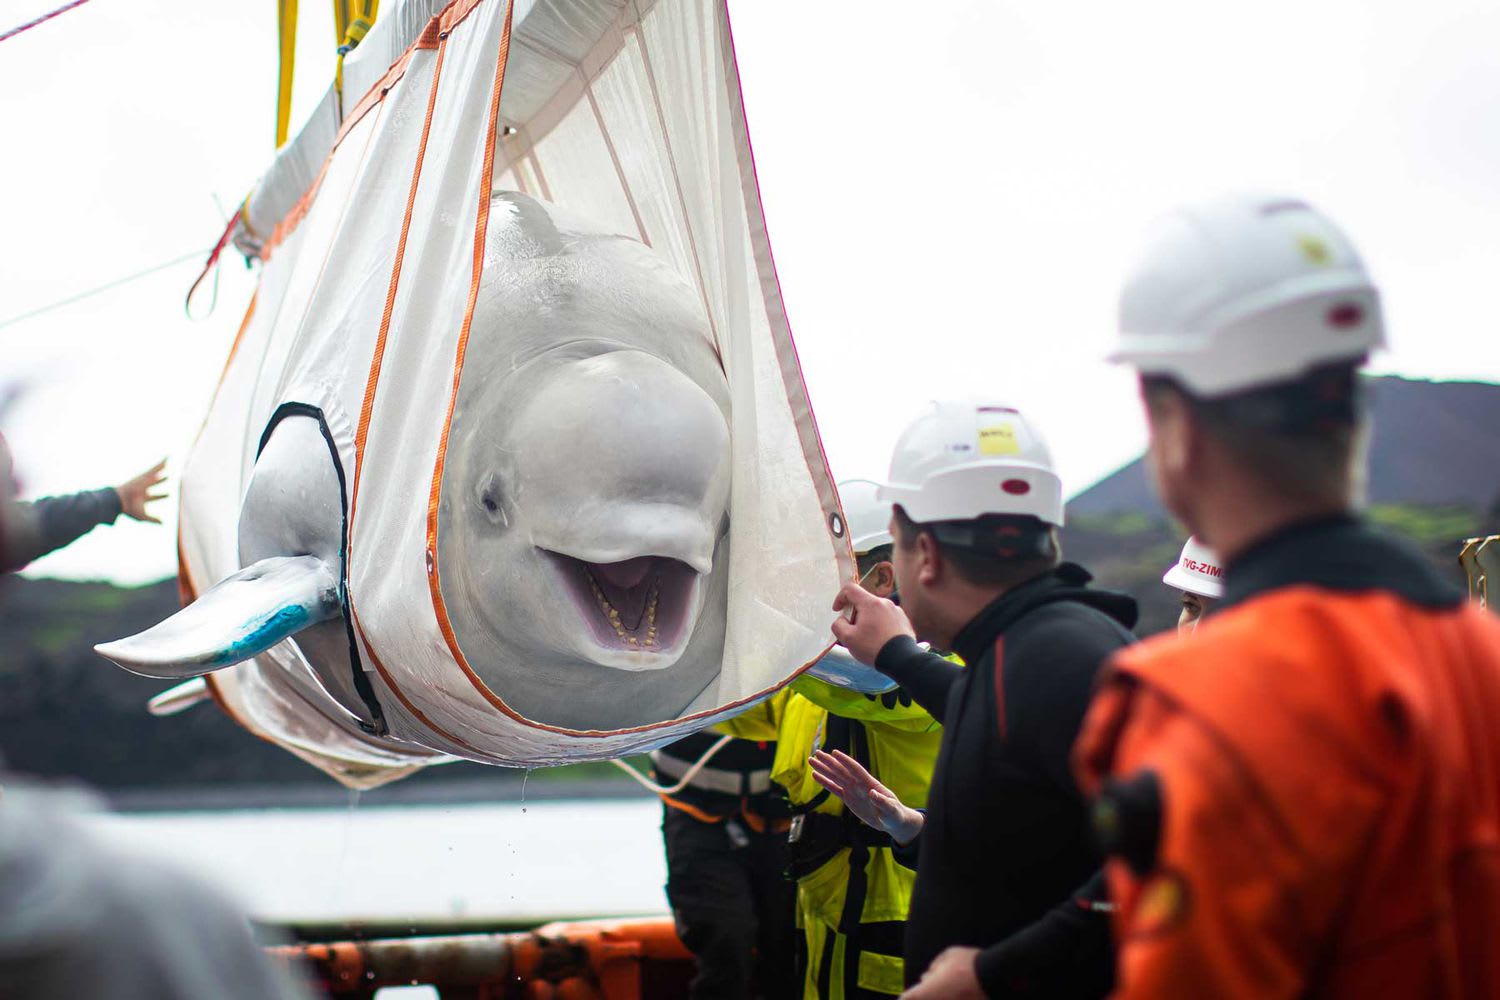 These Rescued Beluga Whales Are About to Swim in the Open Sea for the First Time in 9 Years